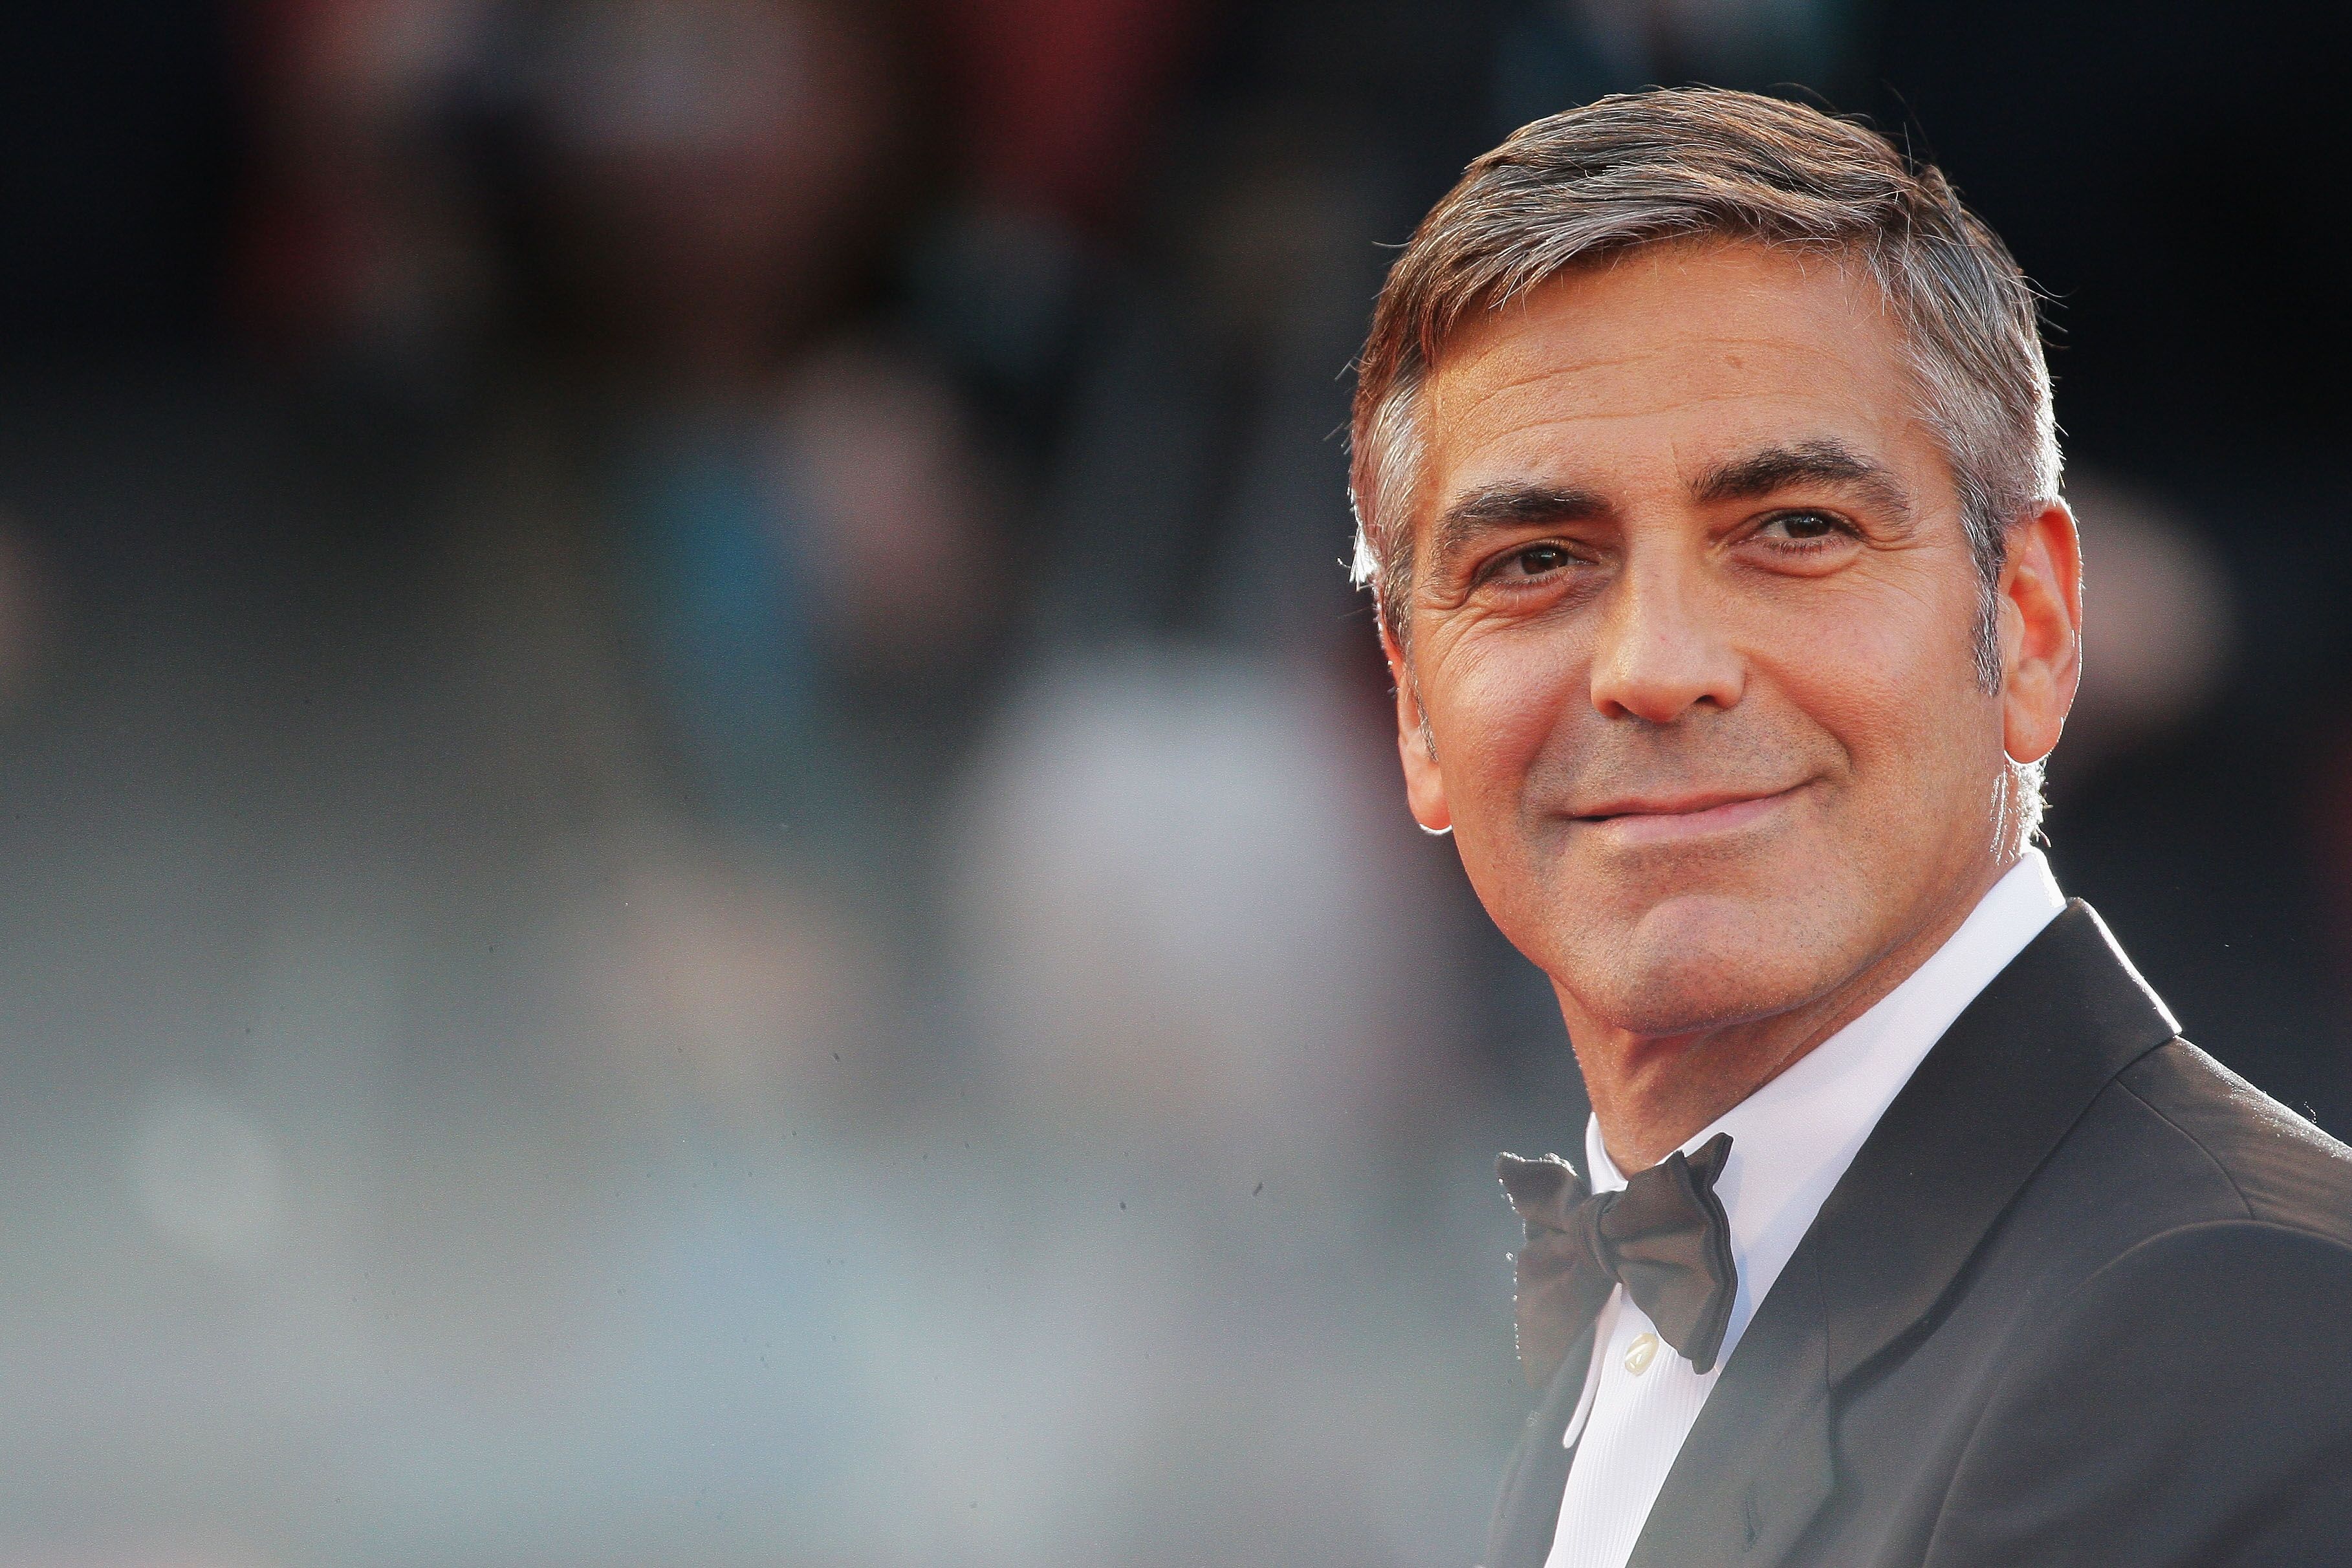 George Clooney at "The Men Who Stare At Goats" premiere at the Sala Grande during the 66th Venice Film Festival in 2009 | Source: Getty Images